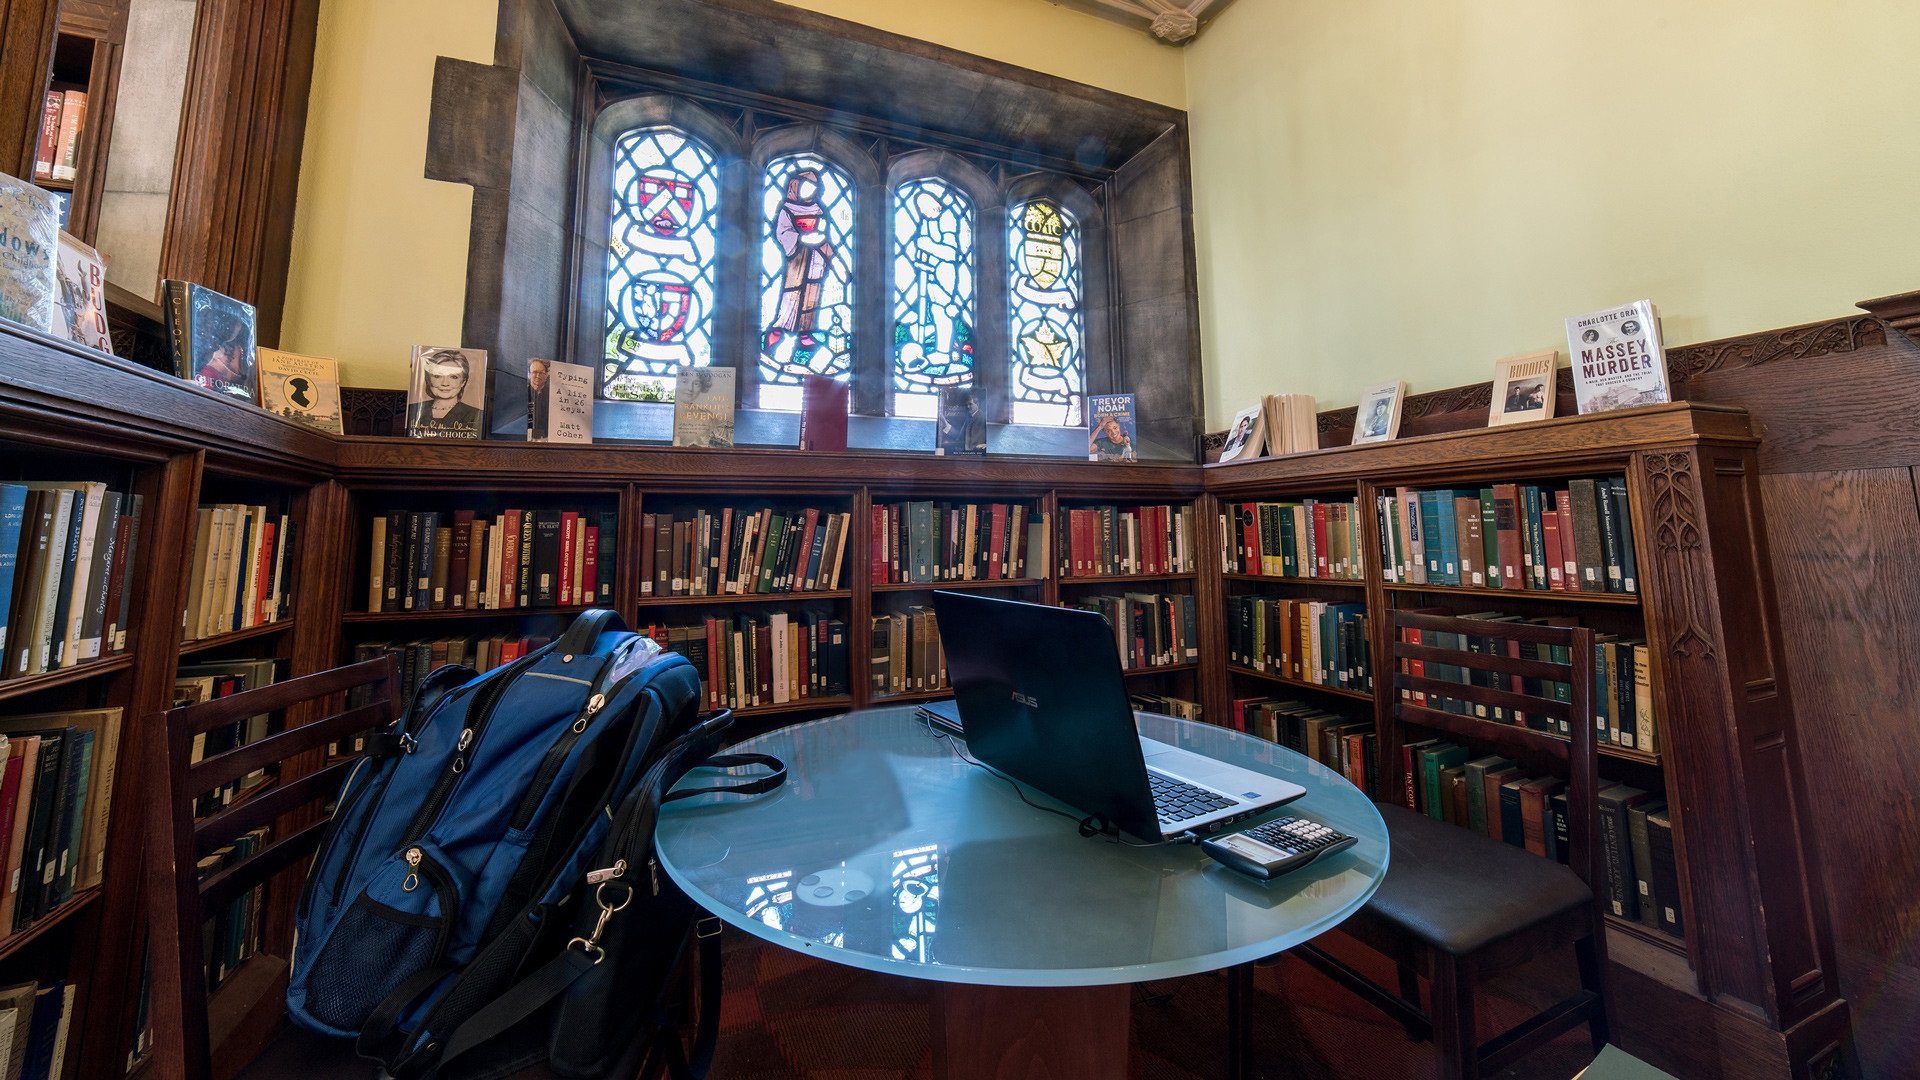 photo of round room with books along walls